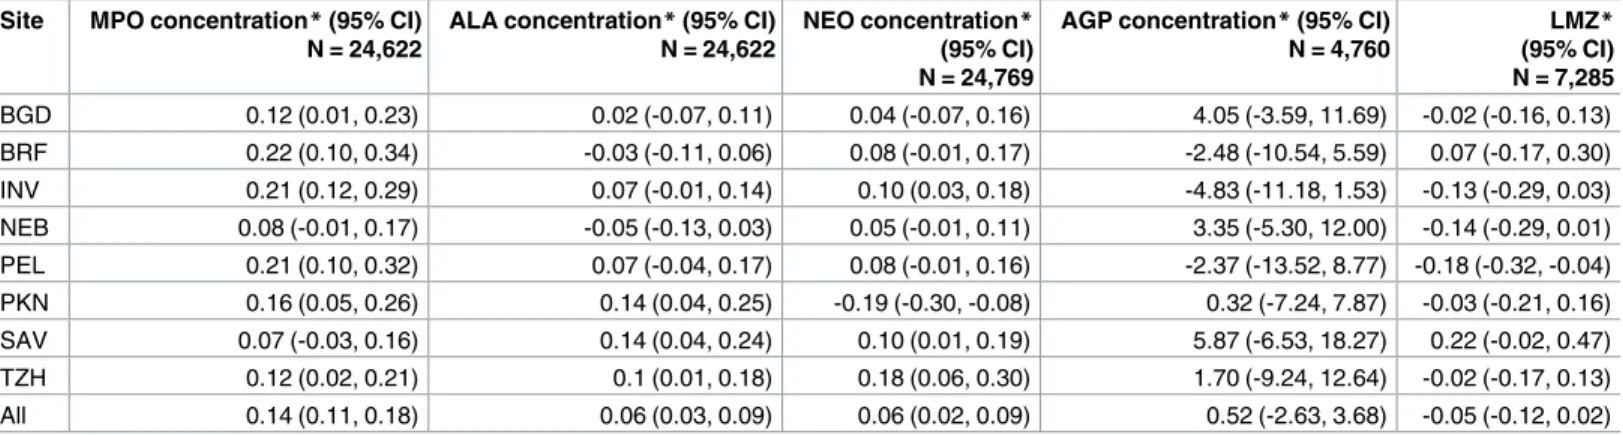 Table 2. Associations between EAEC detection and markers of inflammation and gut permeability in surveillance and diarrheal stools among 2,076 children in the MAL-ED cohort with at least one biomarker measurement.